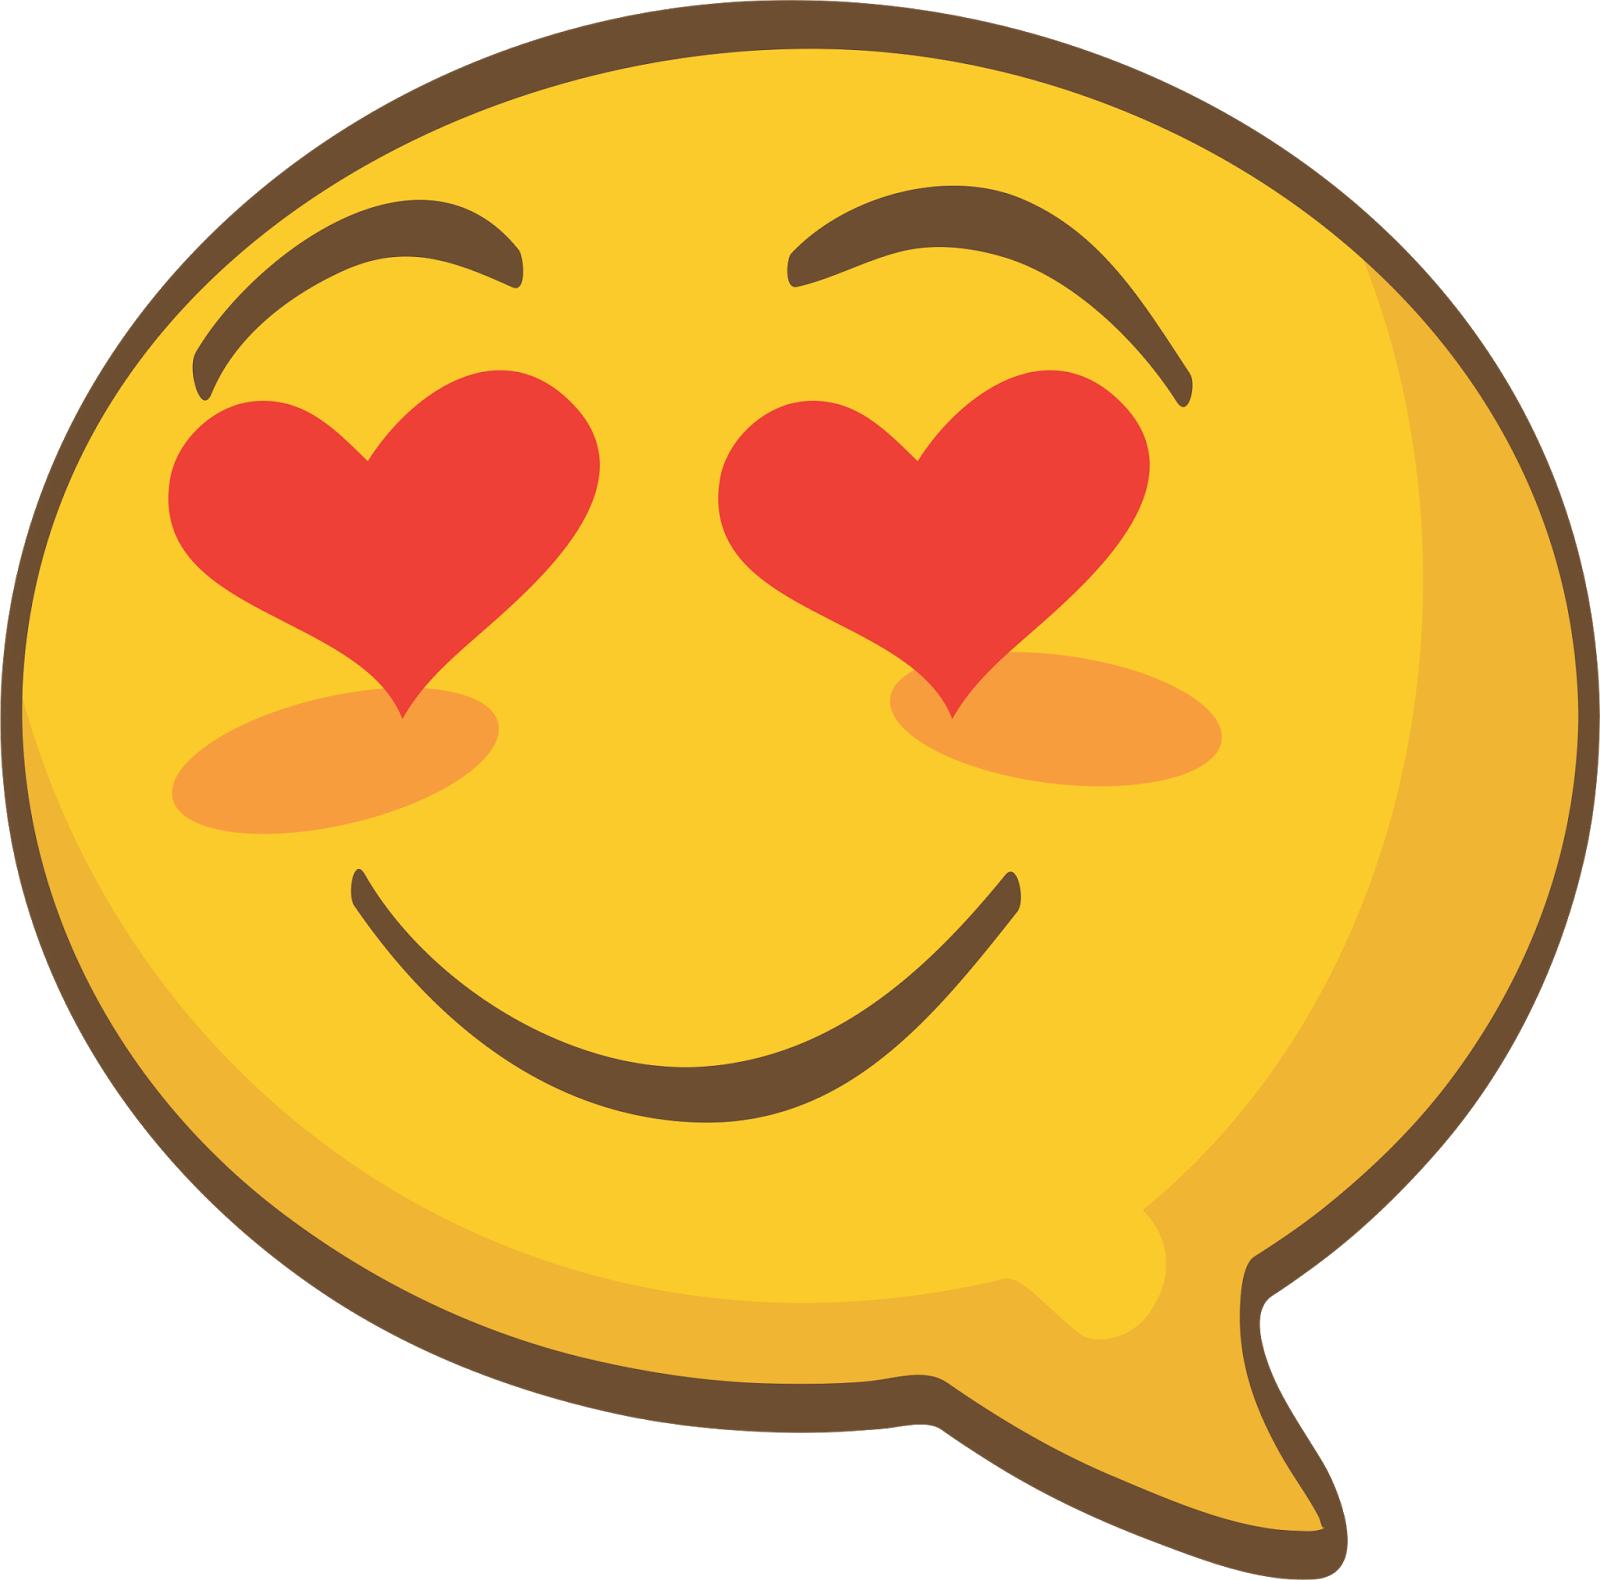 Heart Eyes Smiley Bubble Emoji.png PNG image